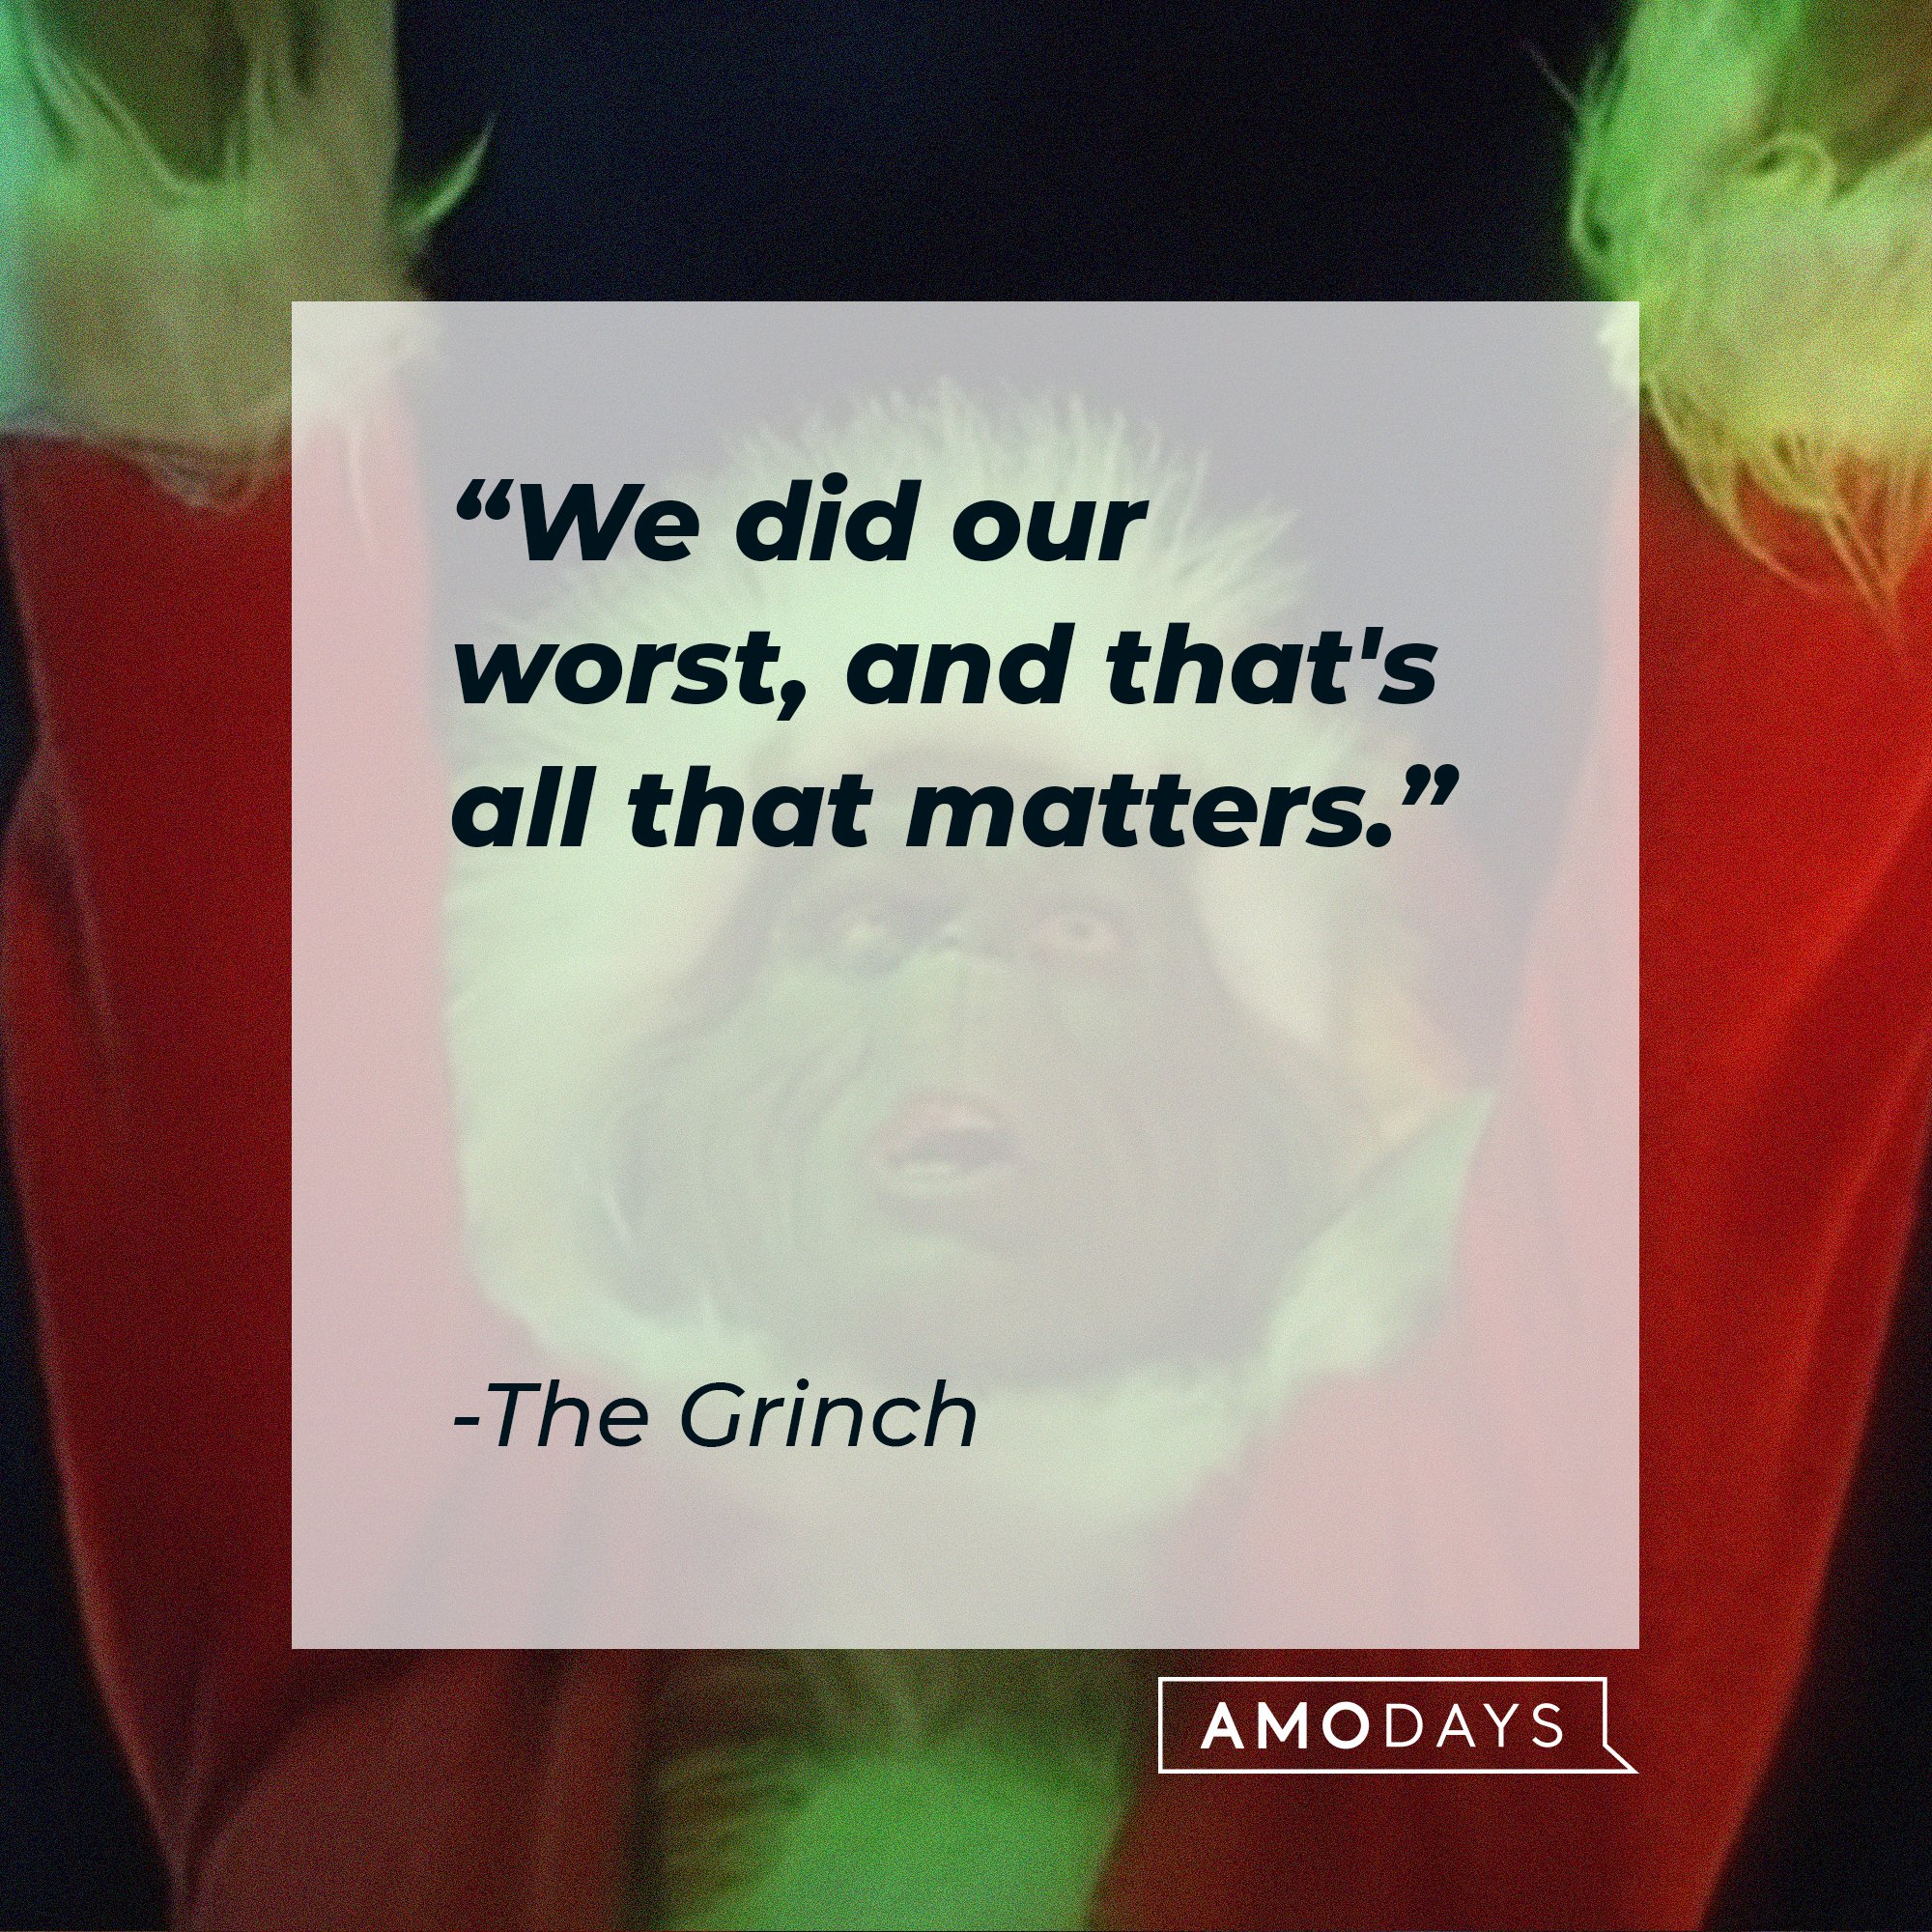 The Grinch’s quote: "We did our worst, and that's all that matters." | Image: AmoDays